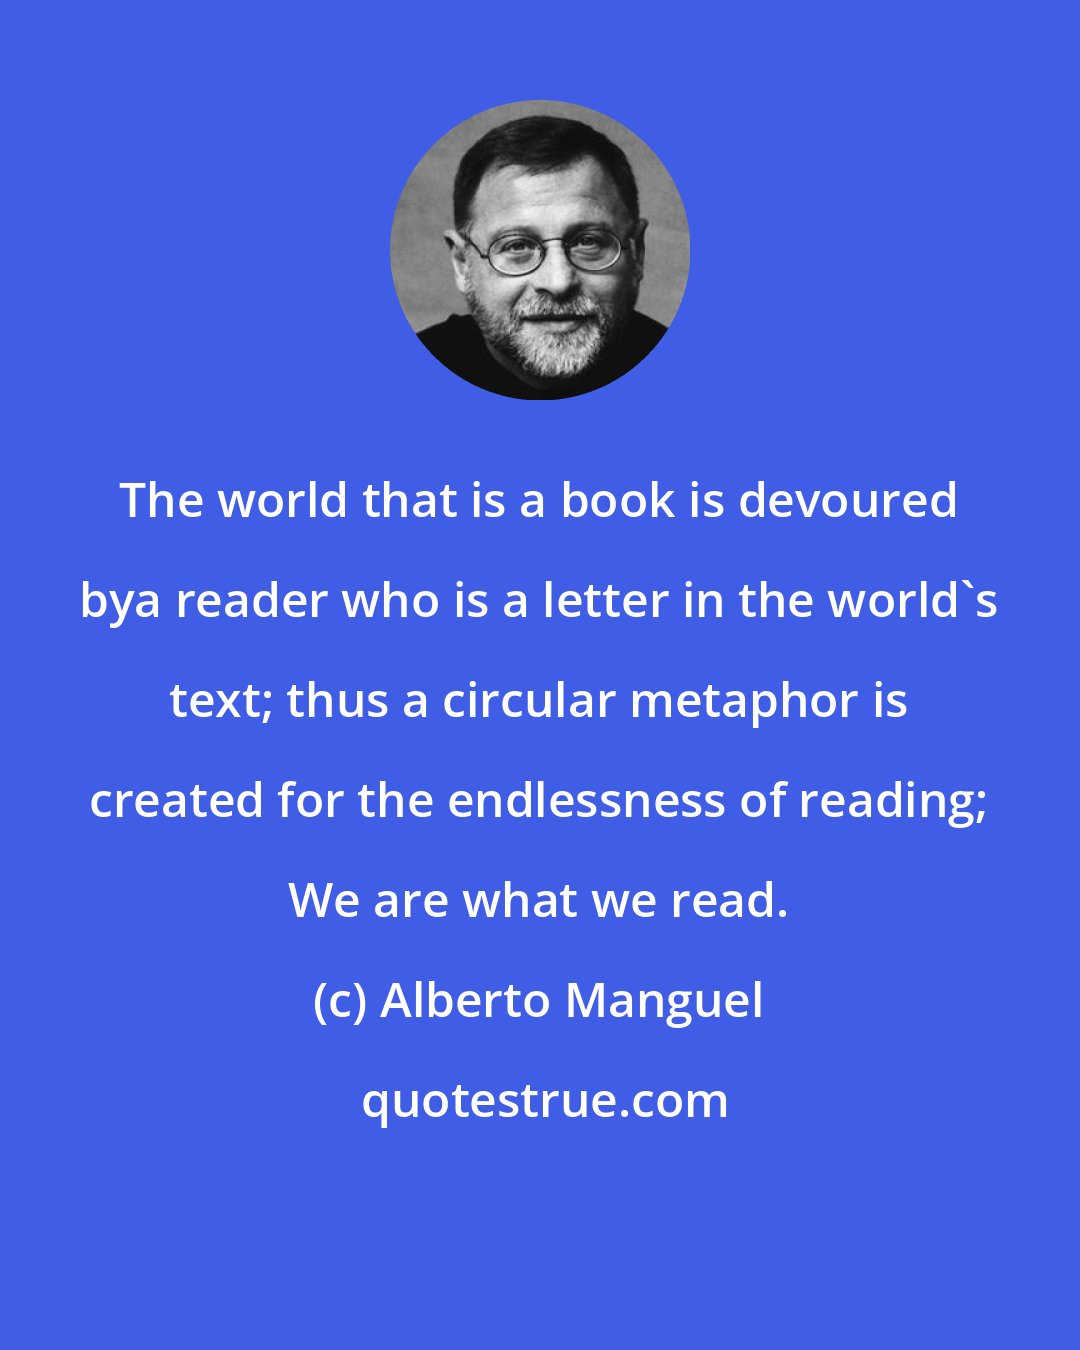 Alberto Manguel: The world that is a book is devoured bya reader who is a letter in the world's text; thus a circular metaphor is created for the endlessness of reading; We are what we read.